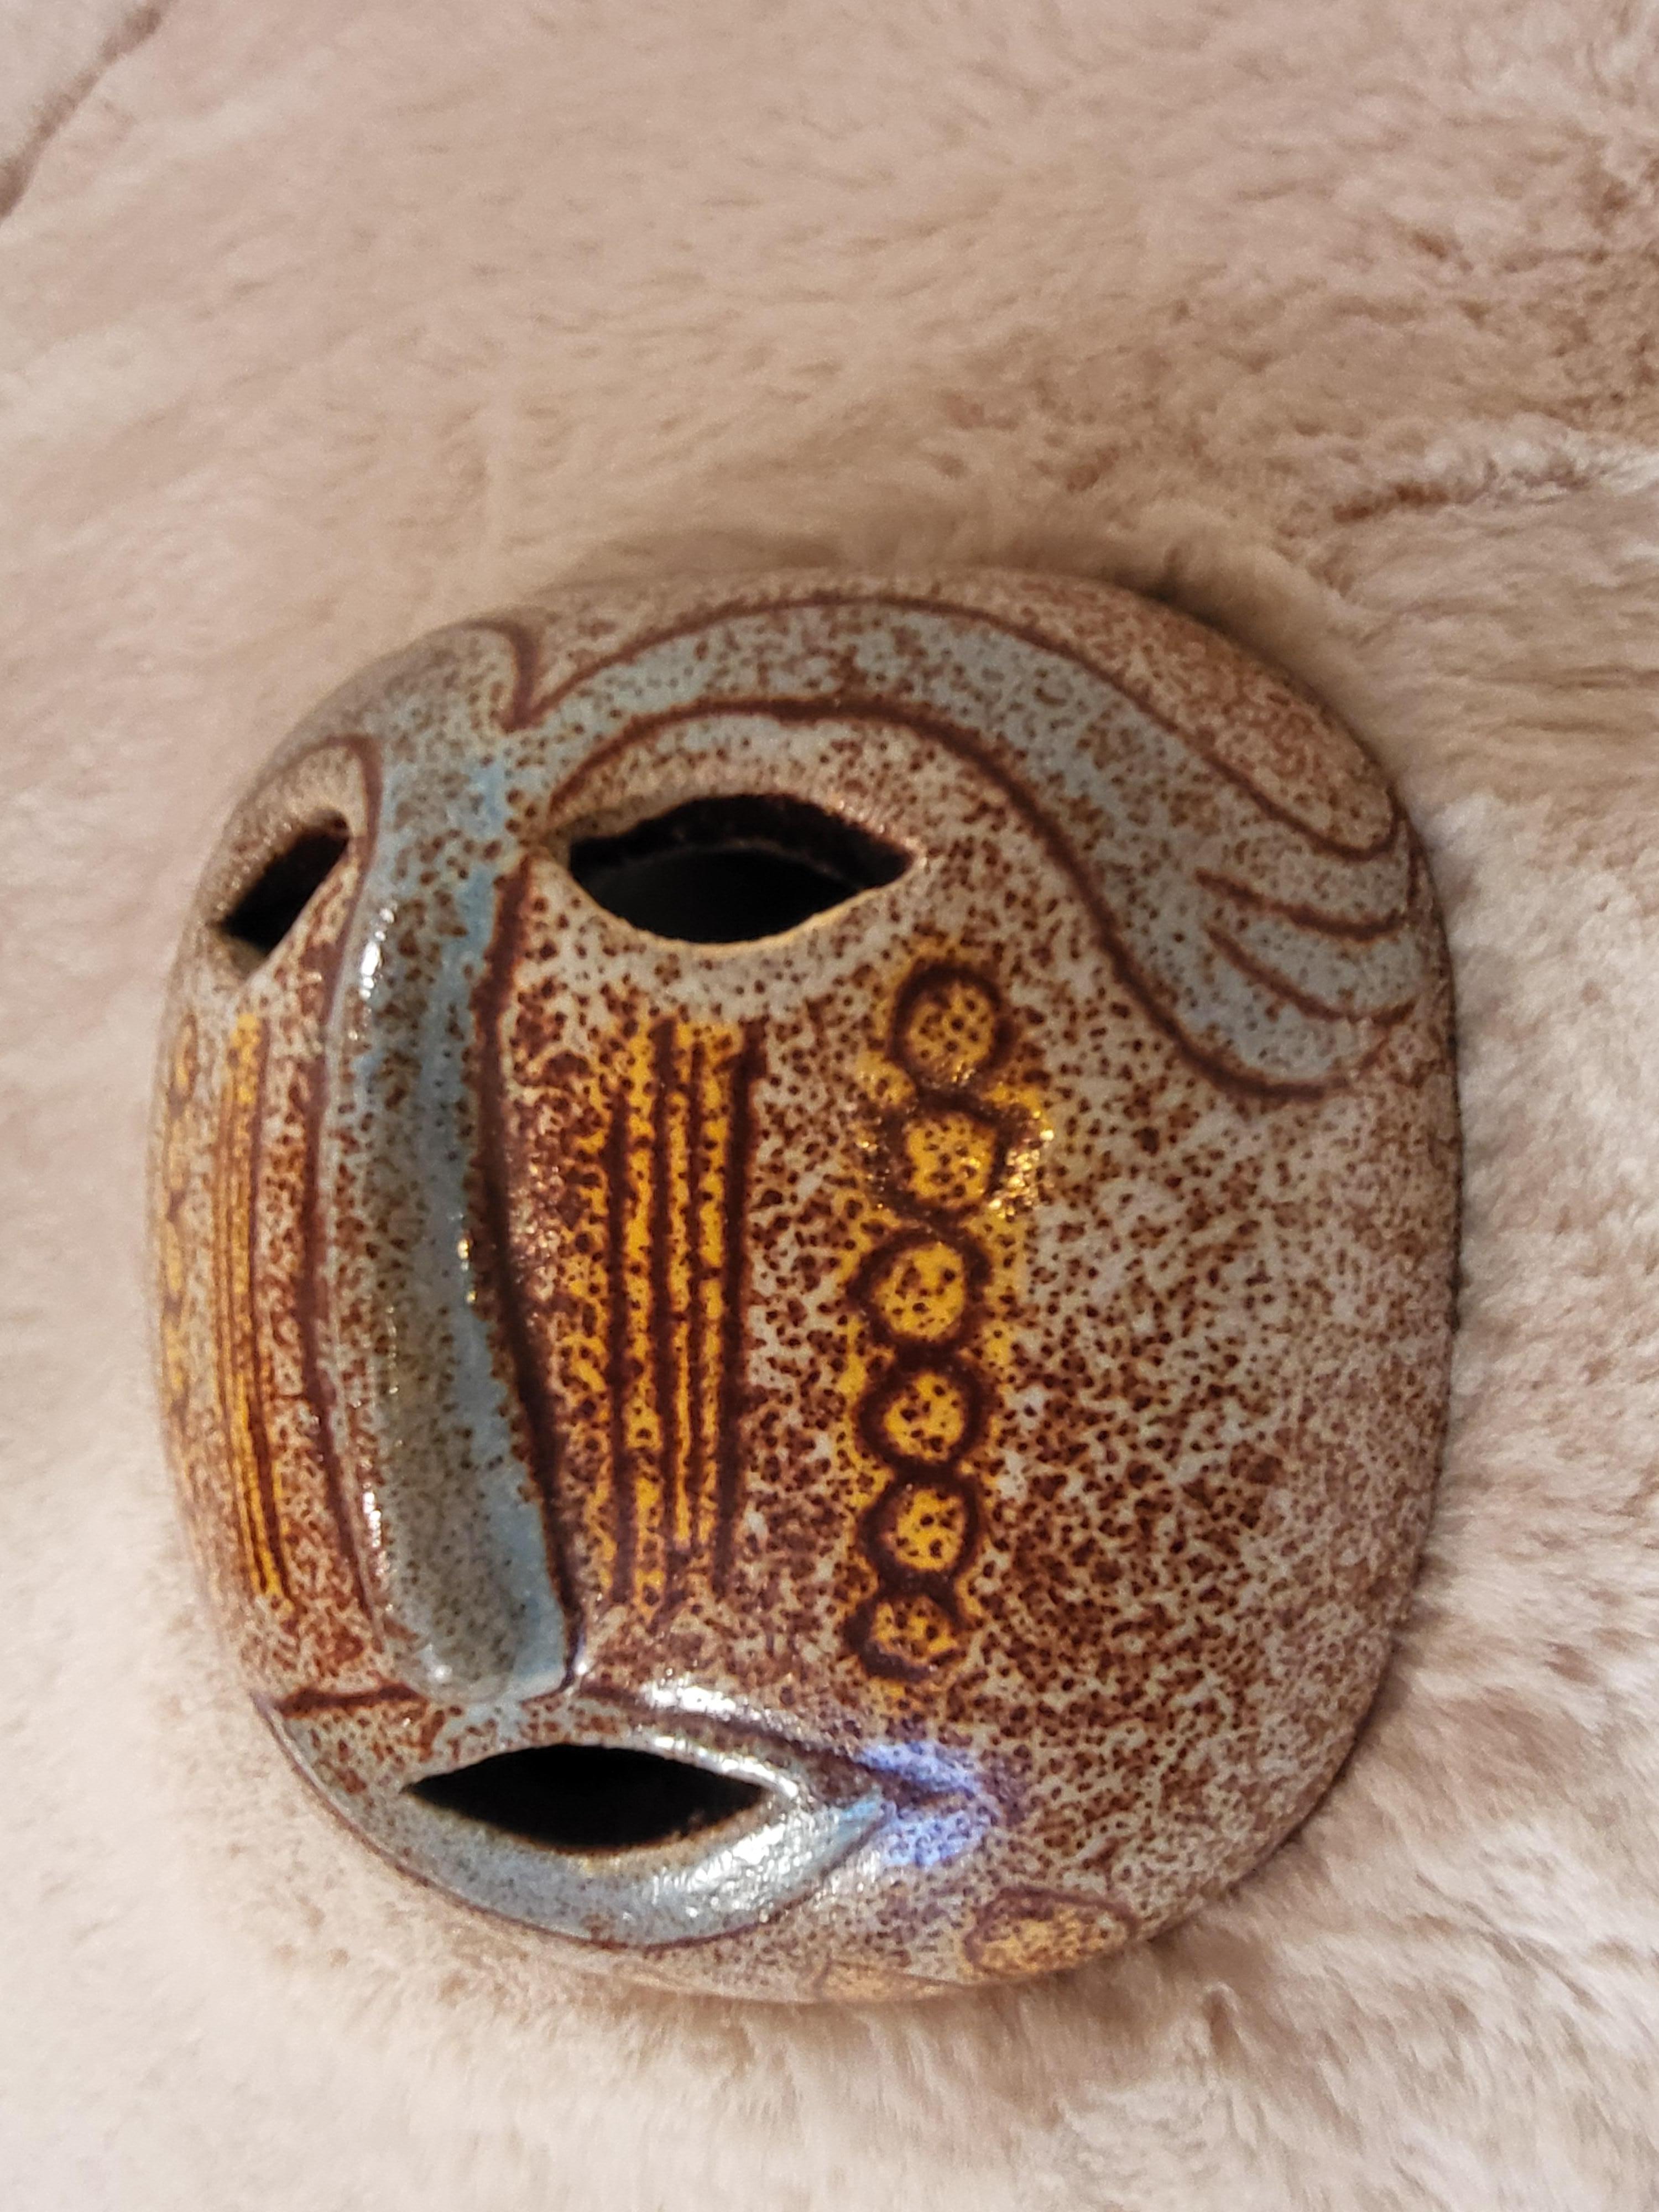 Modern Mask by Accolay pottery, France, between 1947 and 1983